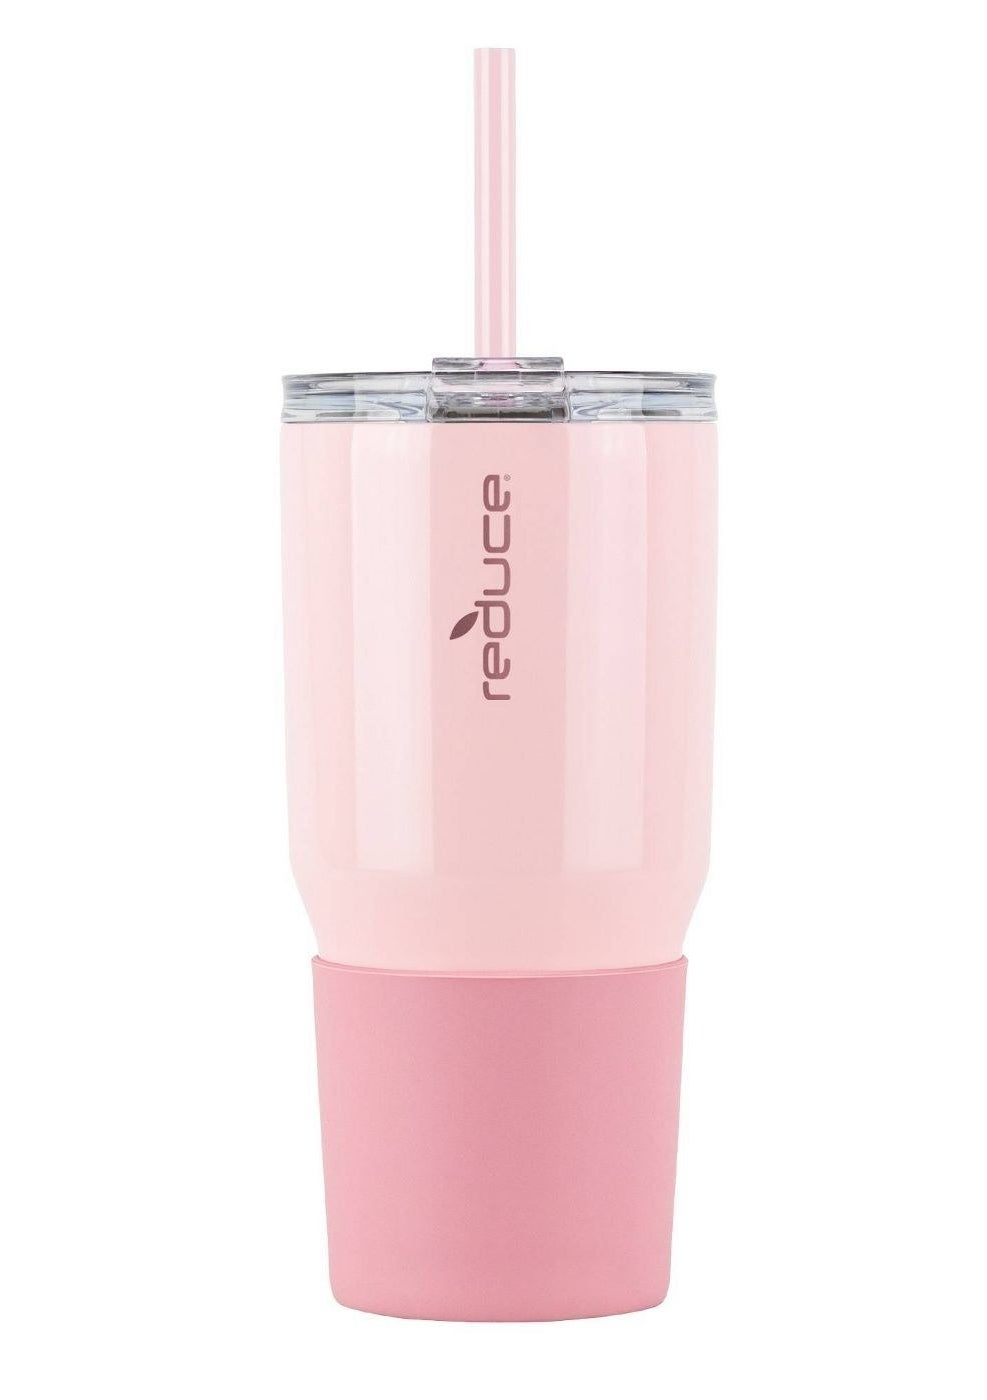 The cotton candy insulated stainless steel travel tumbler